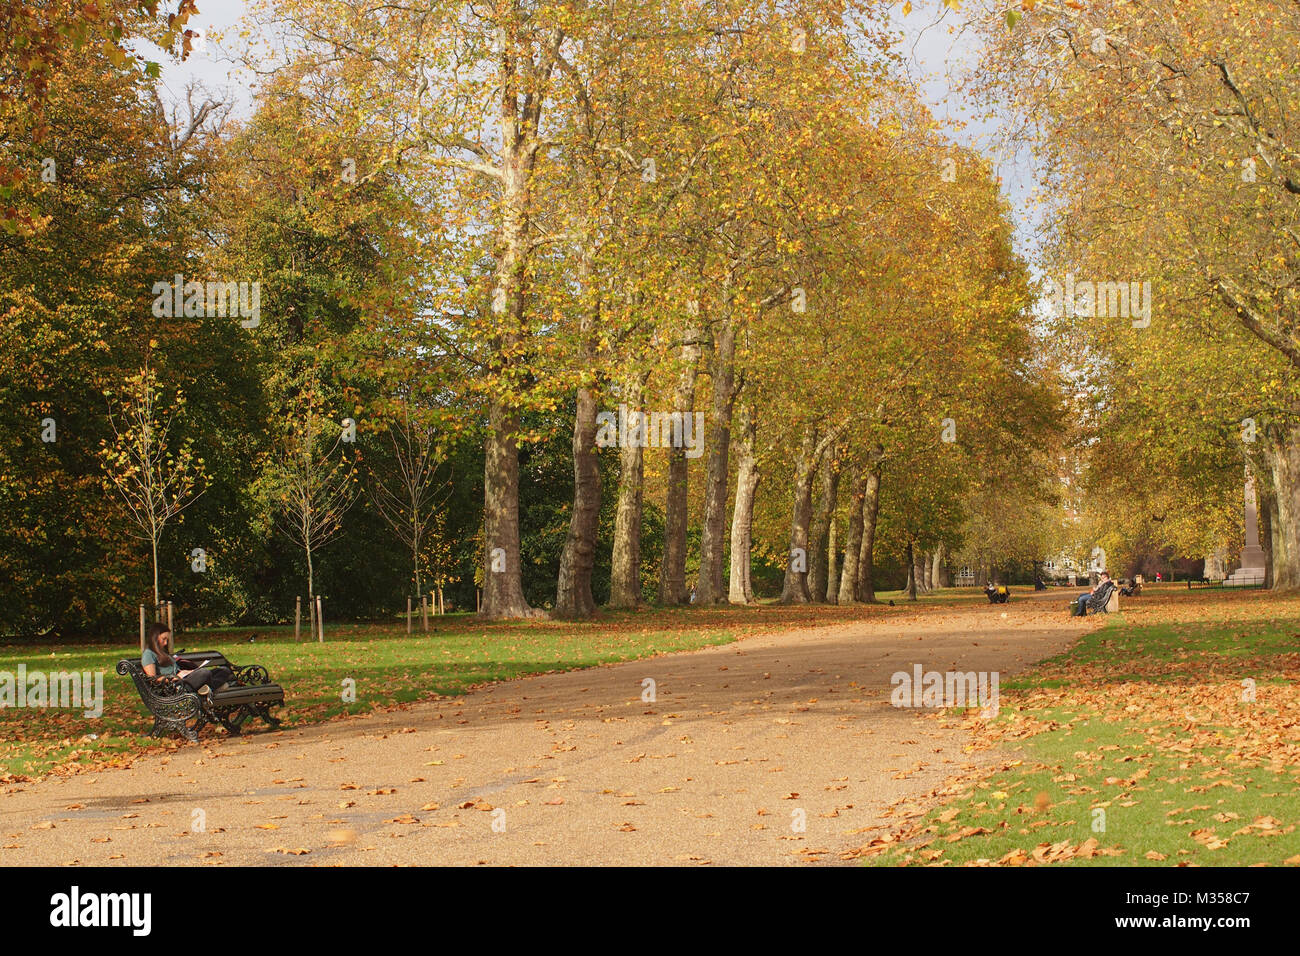 Young woman resting on a park bench in Kensington Gardens, London by a wide path between two avenues of trees with people on benches in the distancesi Stock Photo